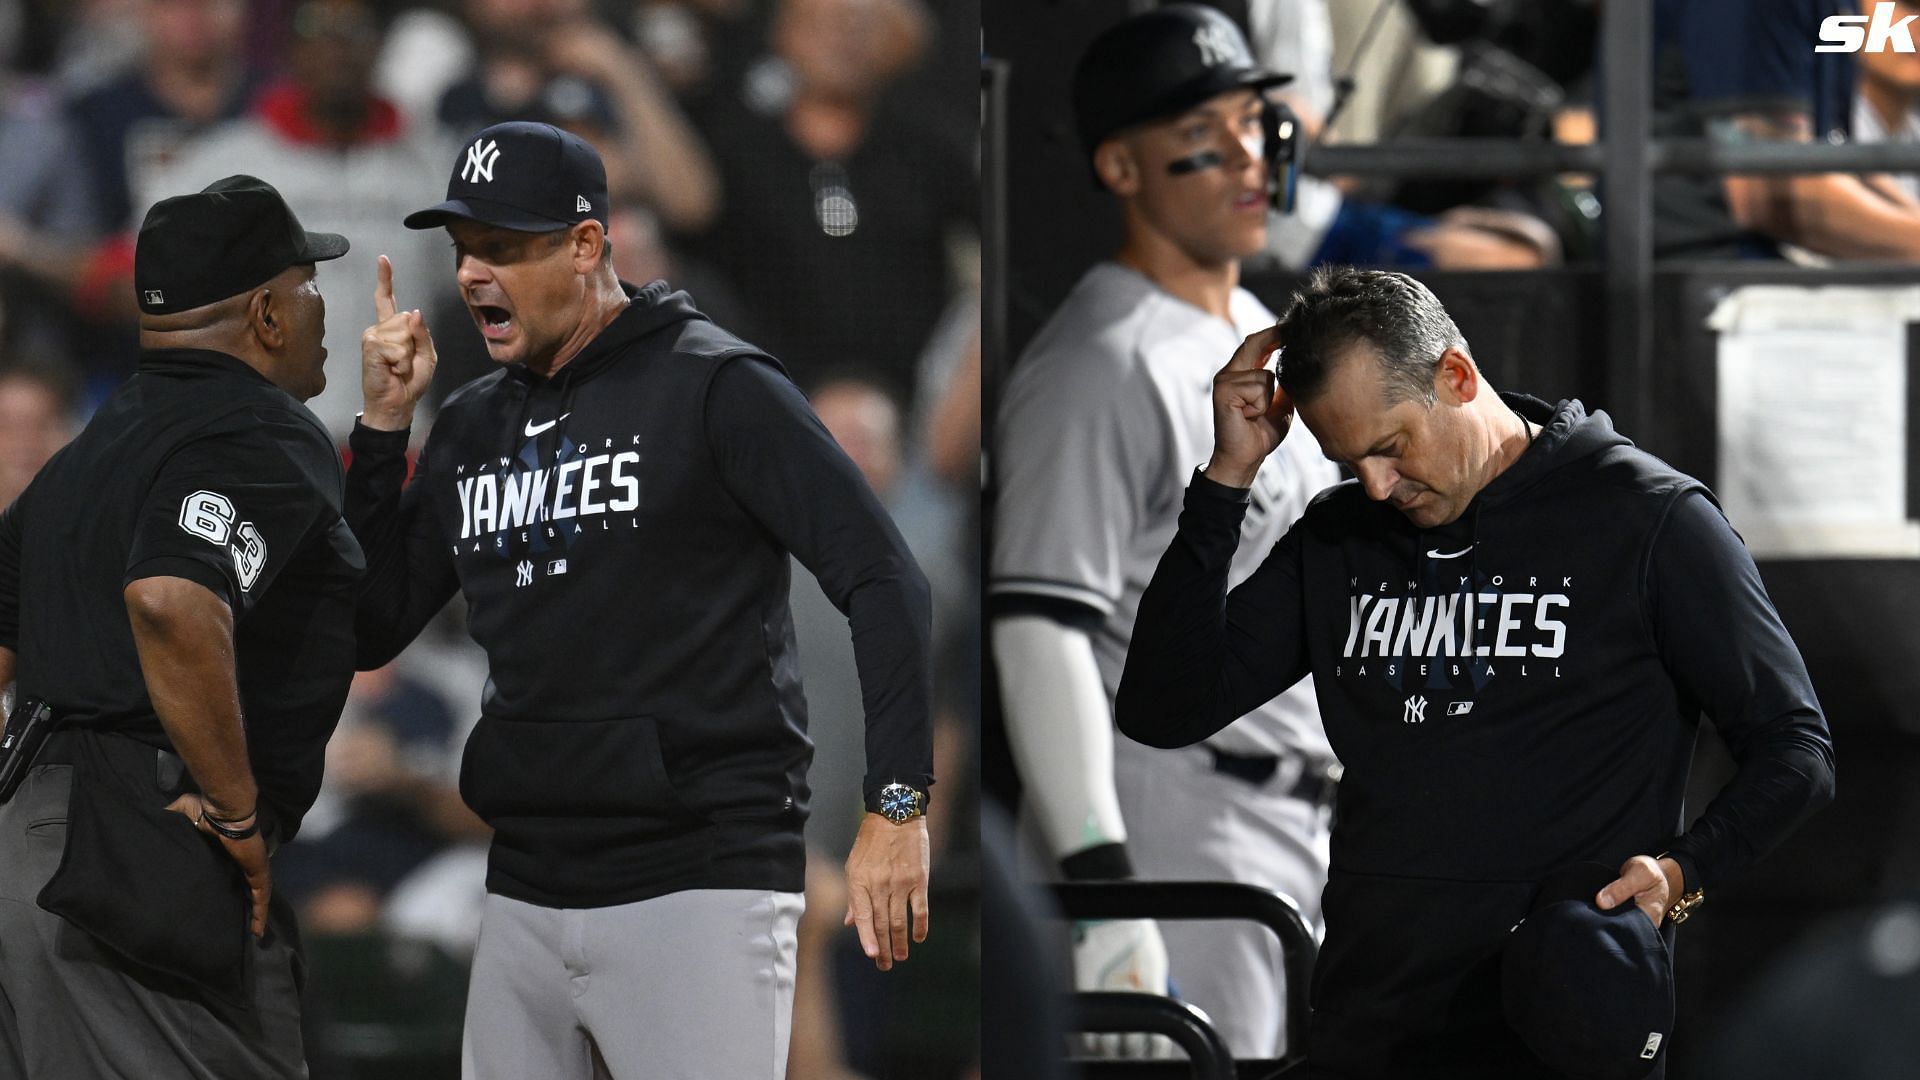 MLB analyst says Aaron Boone has 'lost his mind' as the Yankees